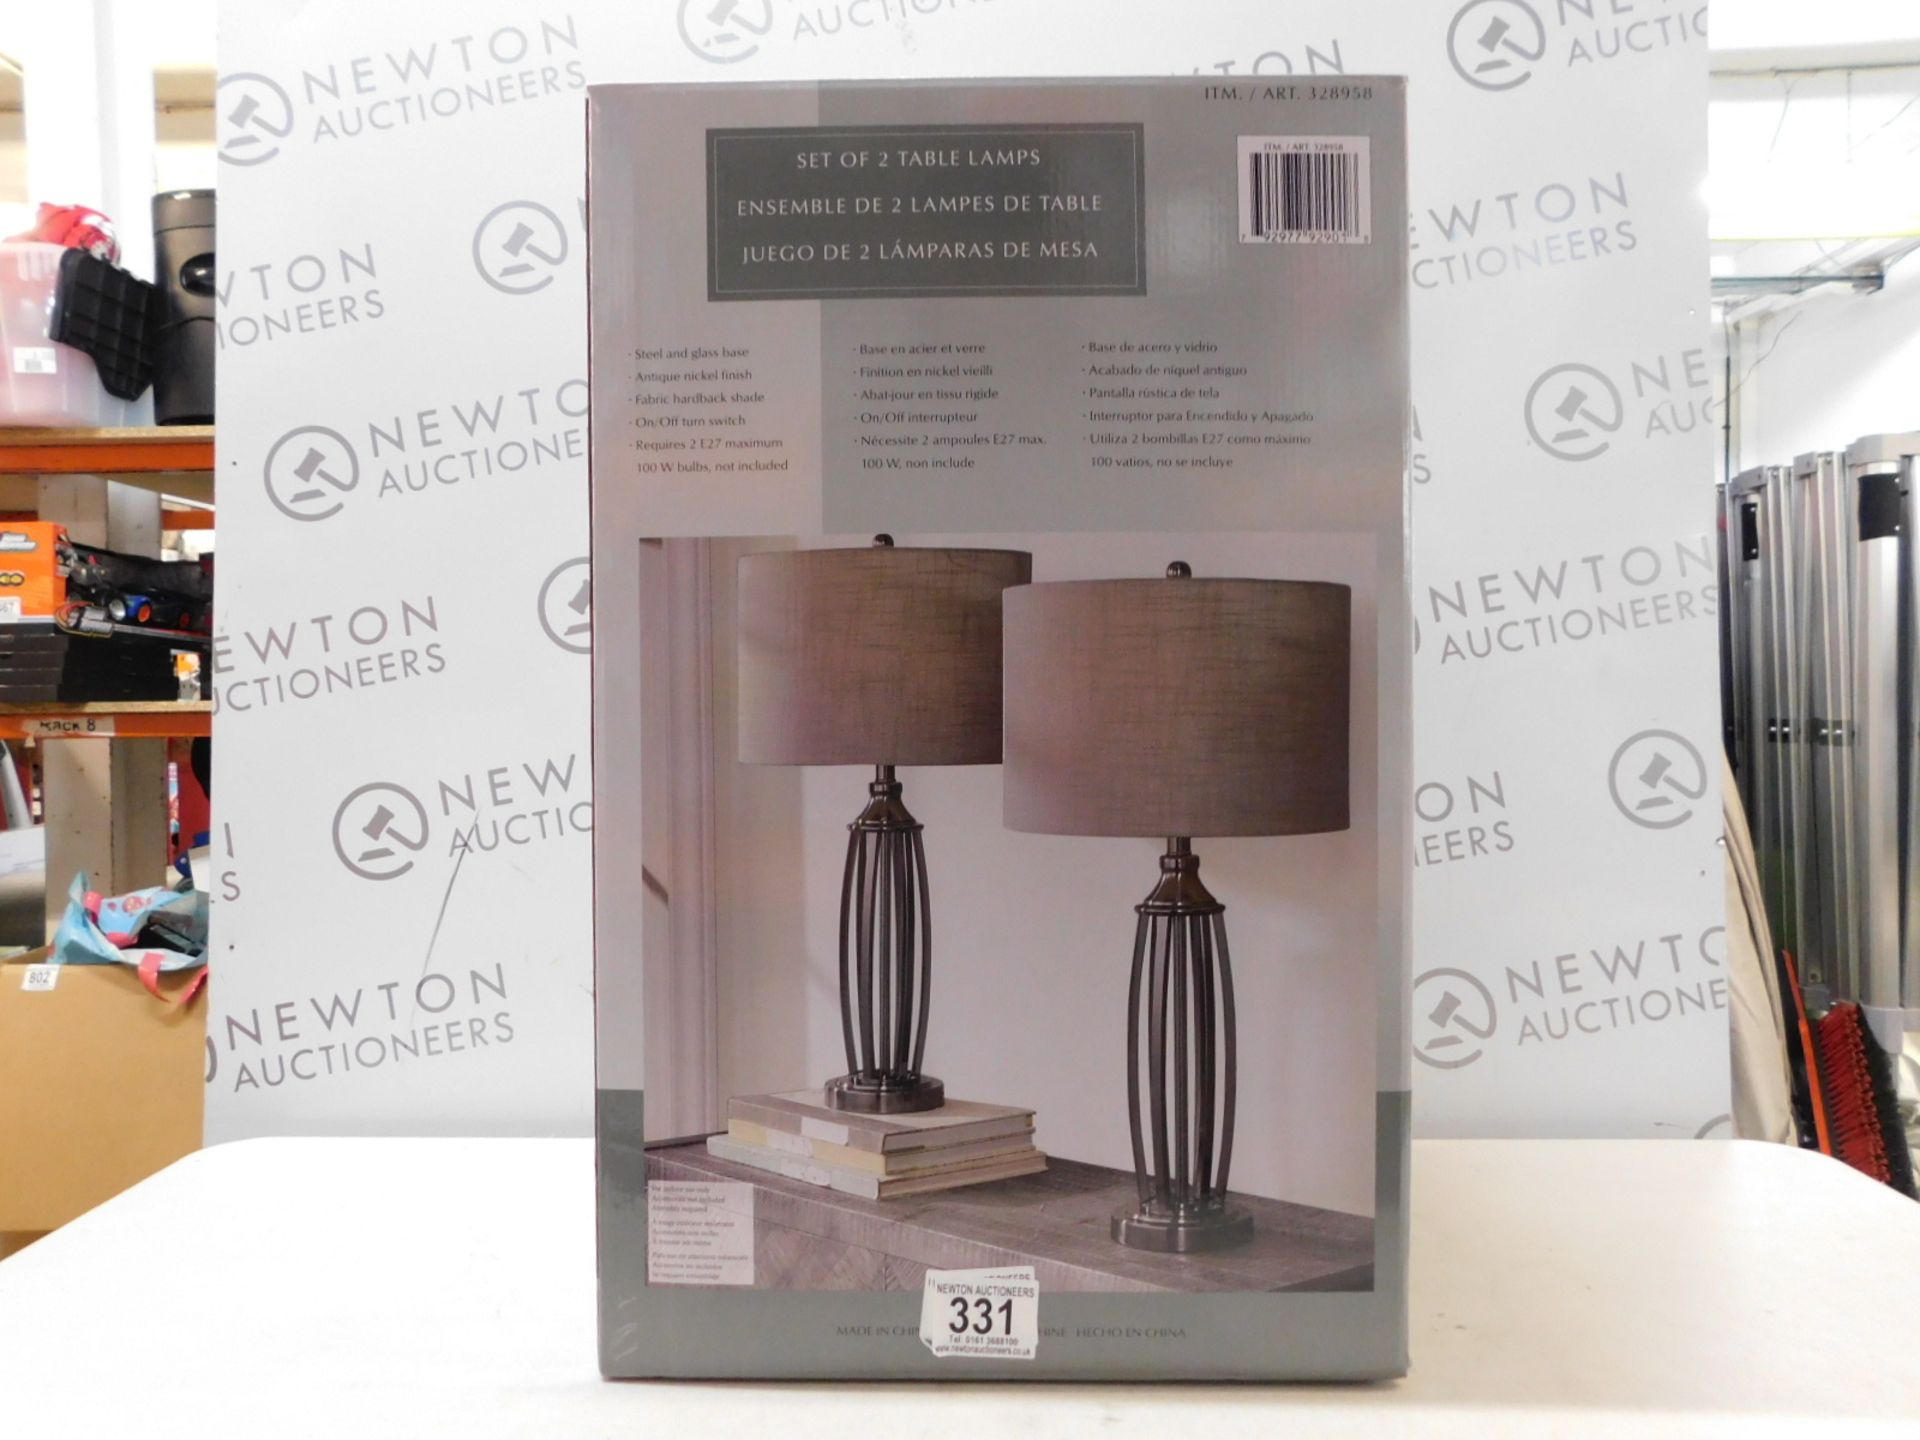 1 BOXED PAIR OF UTTERMOST JOLEN STEEL & GLASS TABLE LAMPS RRP Â£99